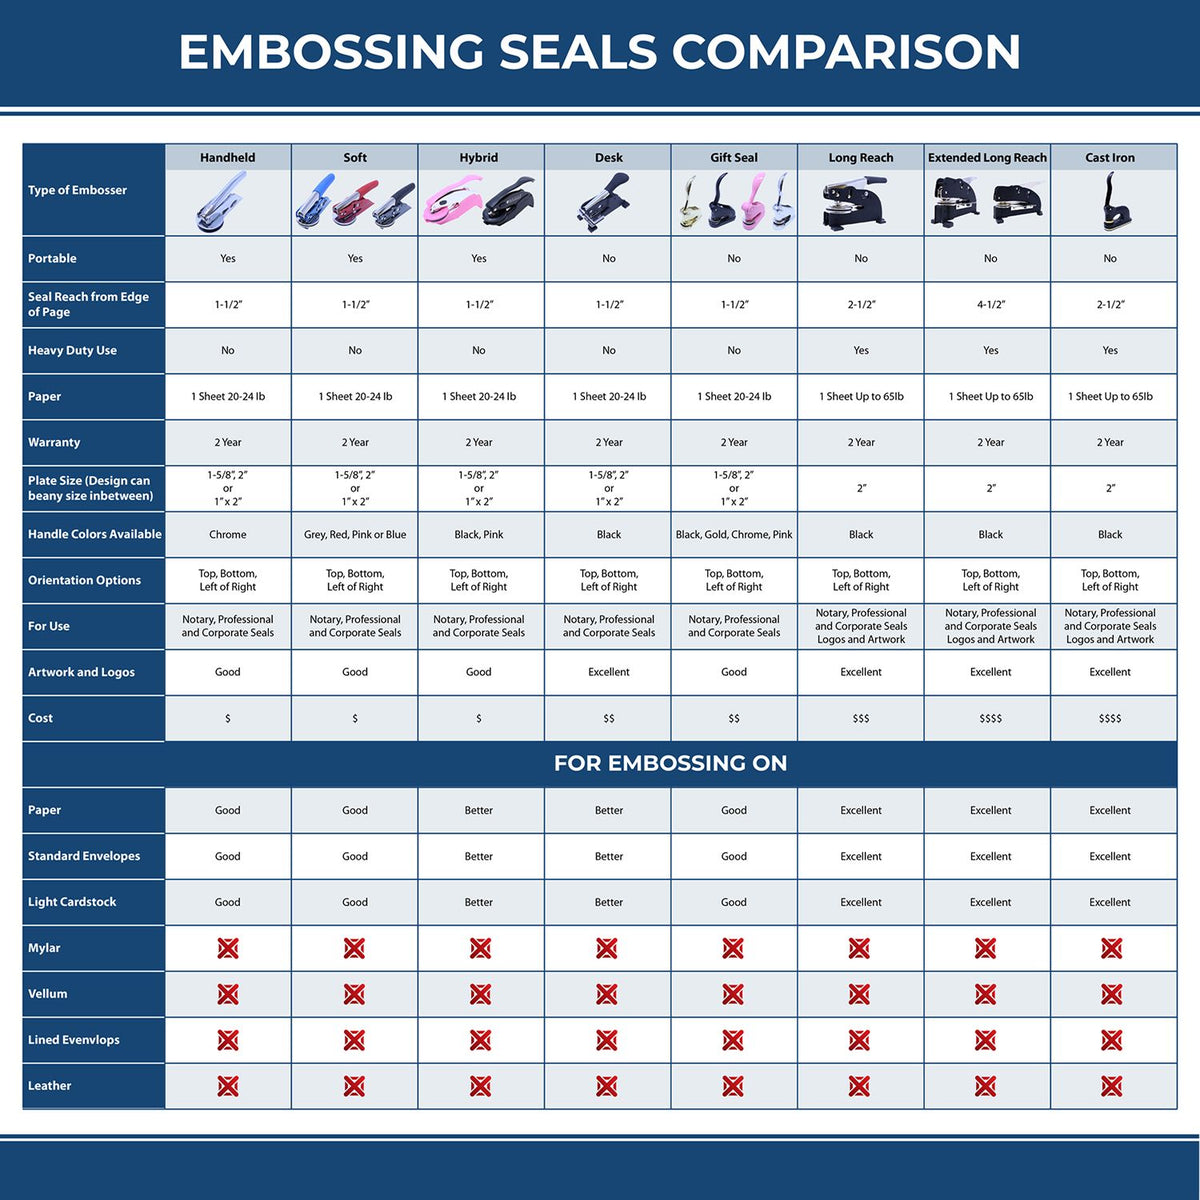 A comparison chart for the different types of mount models available for the Heavy Duty Cast Iron Iowa Engineer Seal Embosser.